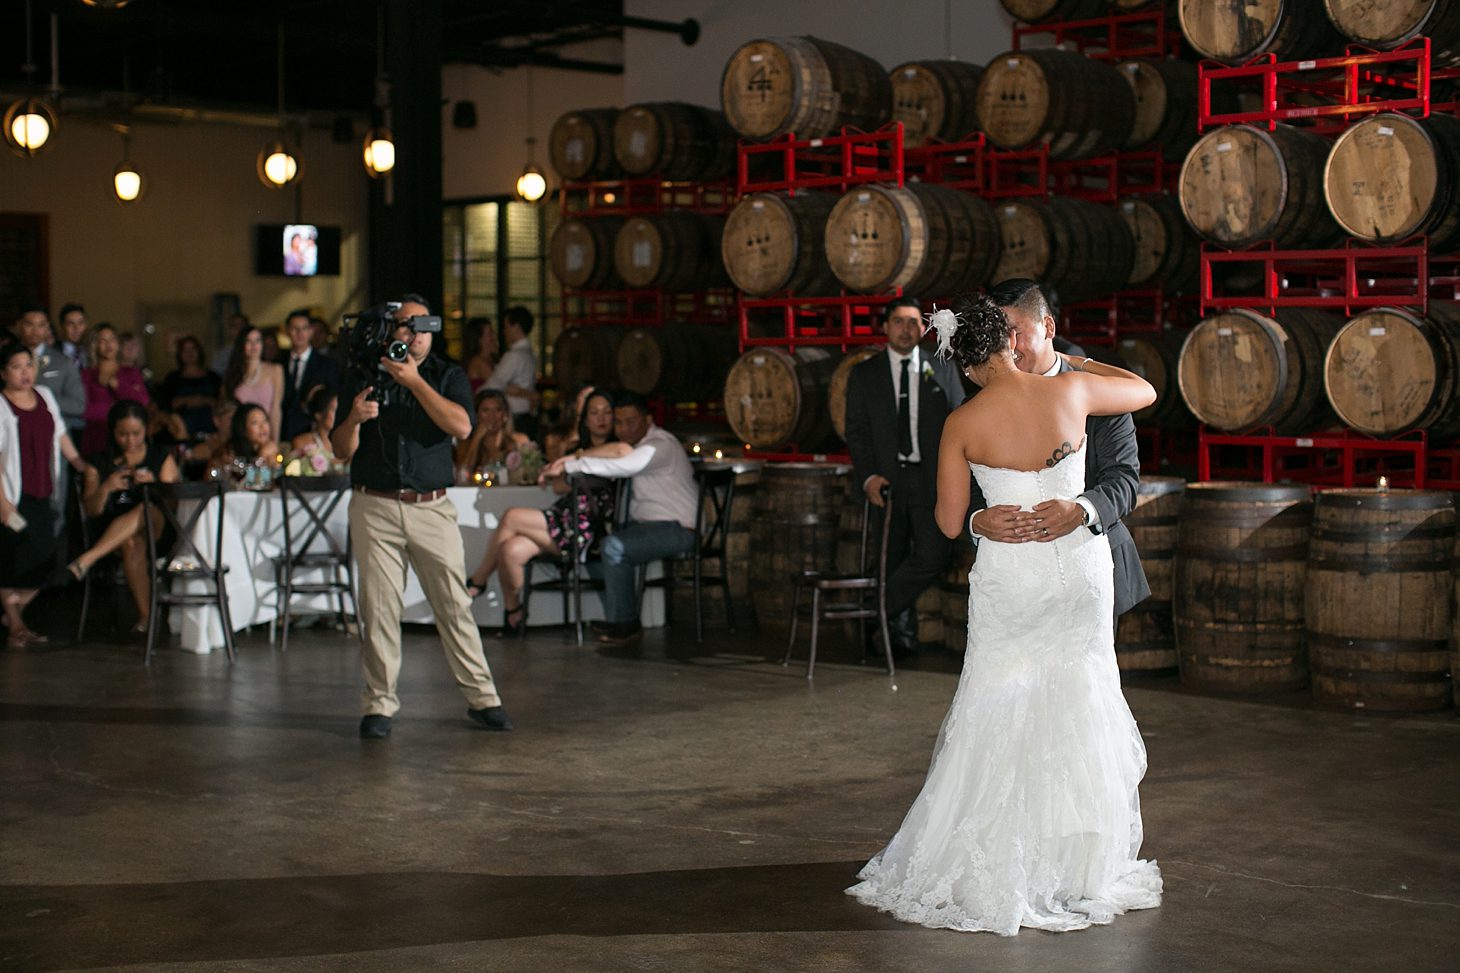 Revolution Tap Room Chicago Wedding by Christy Tyler Photography_0075